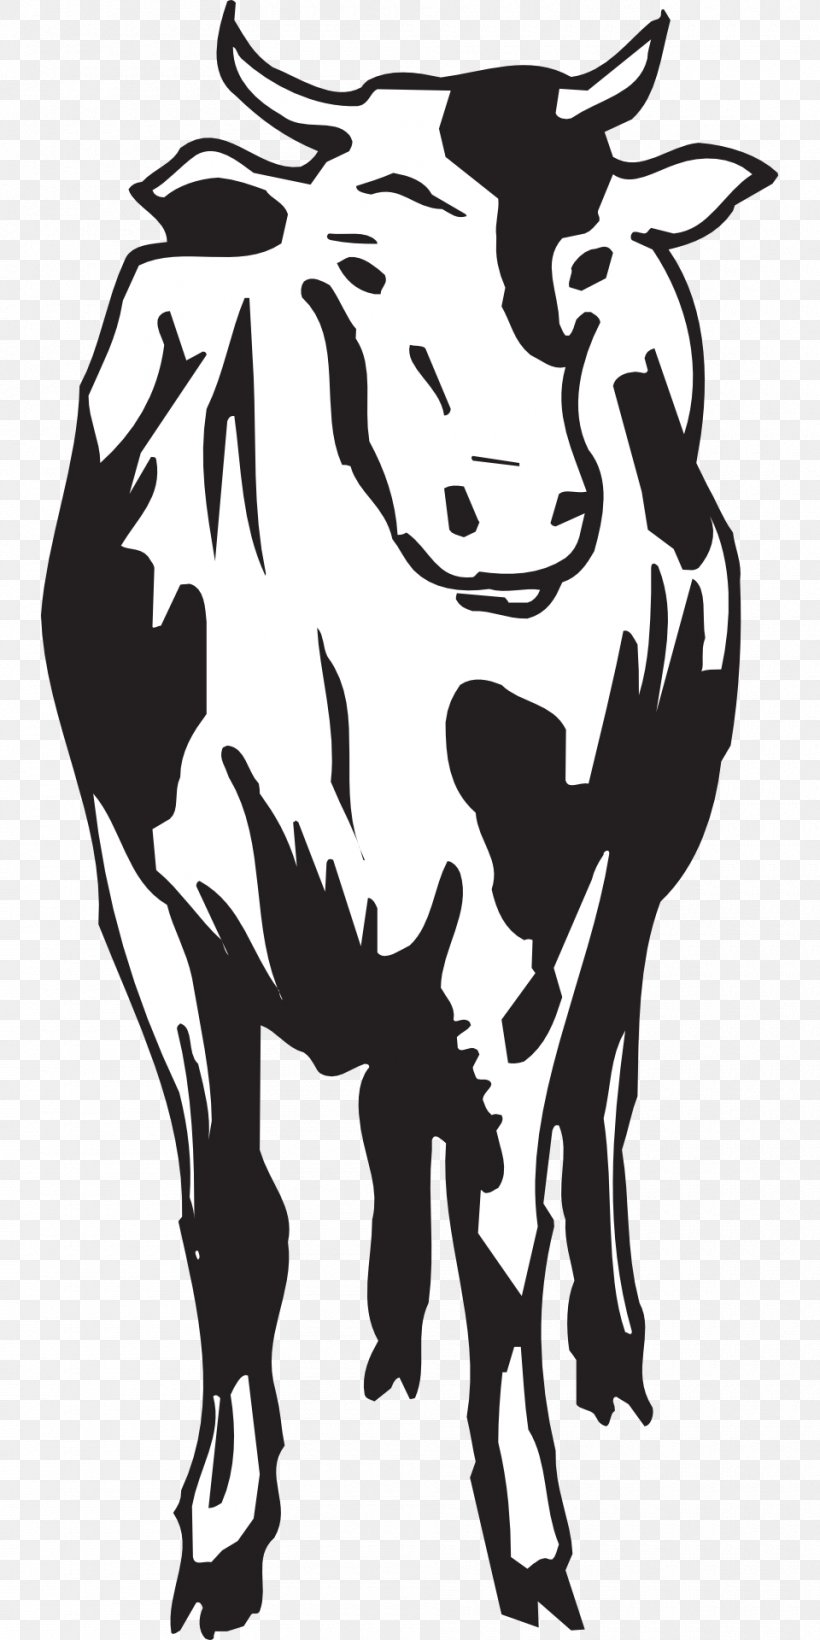 Charolais Cattle Holstein Friesian Cattle Angus Cattle Dairy Cattle Livestock, PNG, 960x1920px, Charolais Cattle, Angus Cattle, Art, Black, Black And White Download Free